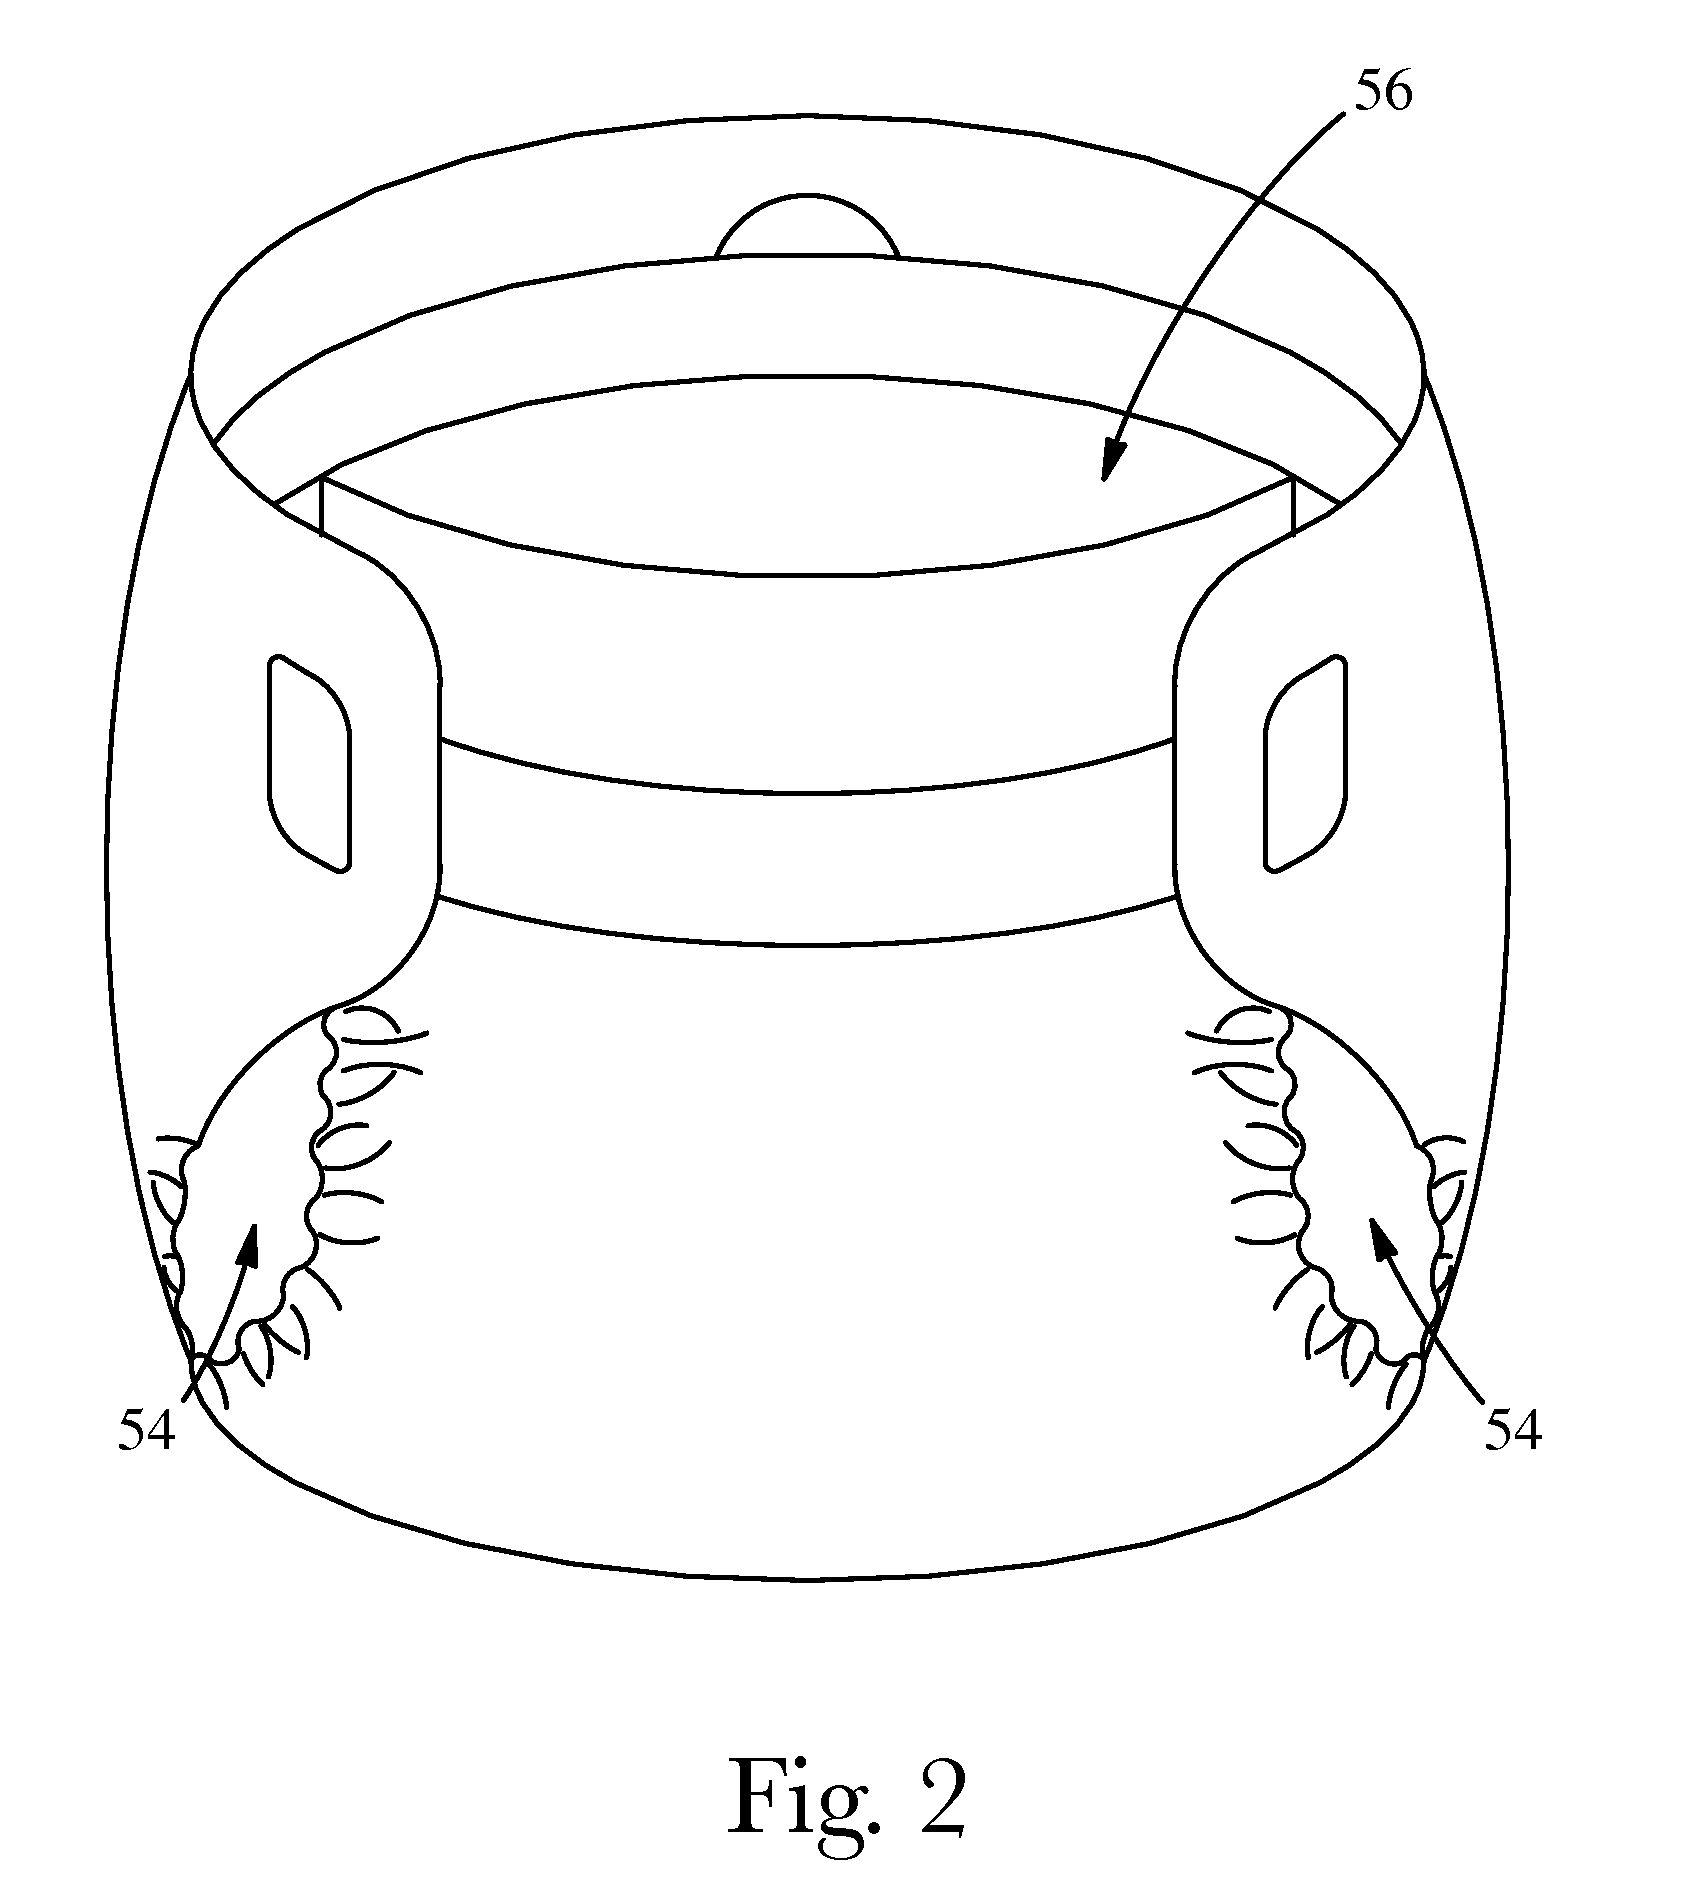 Reusable Outer Cover For An Absorbent Article Having Zones Of Varying Properties